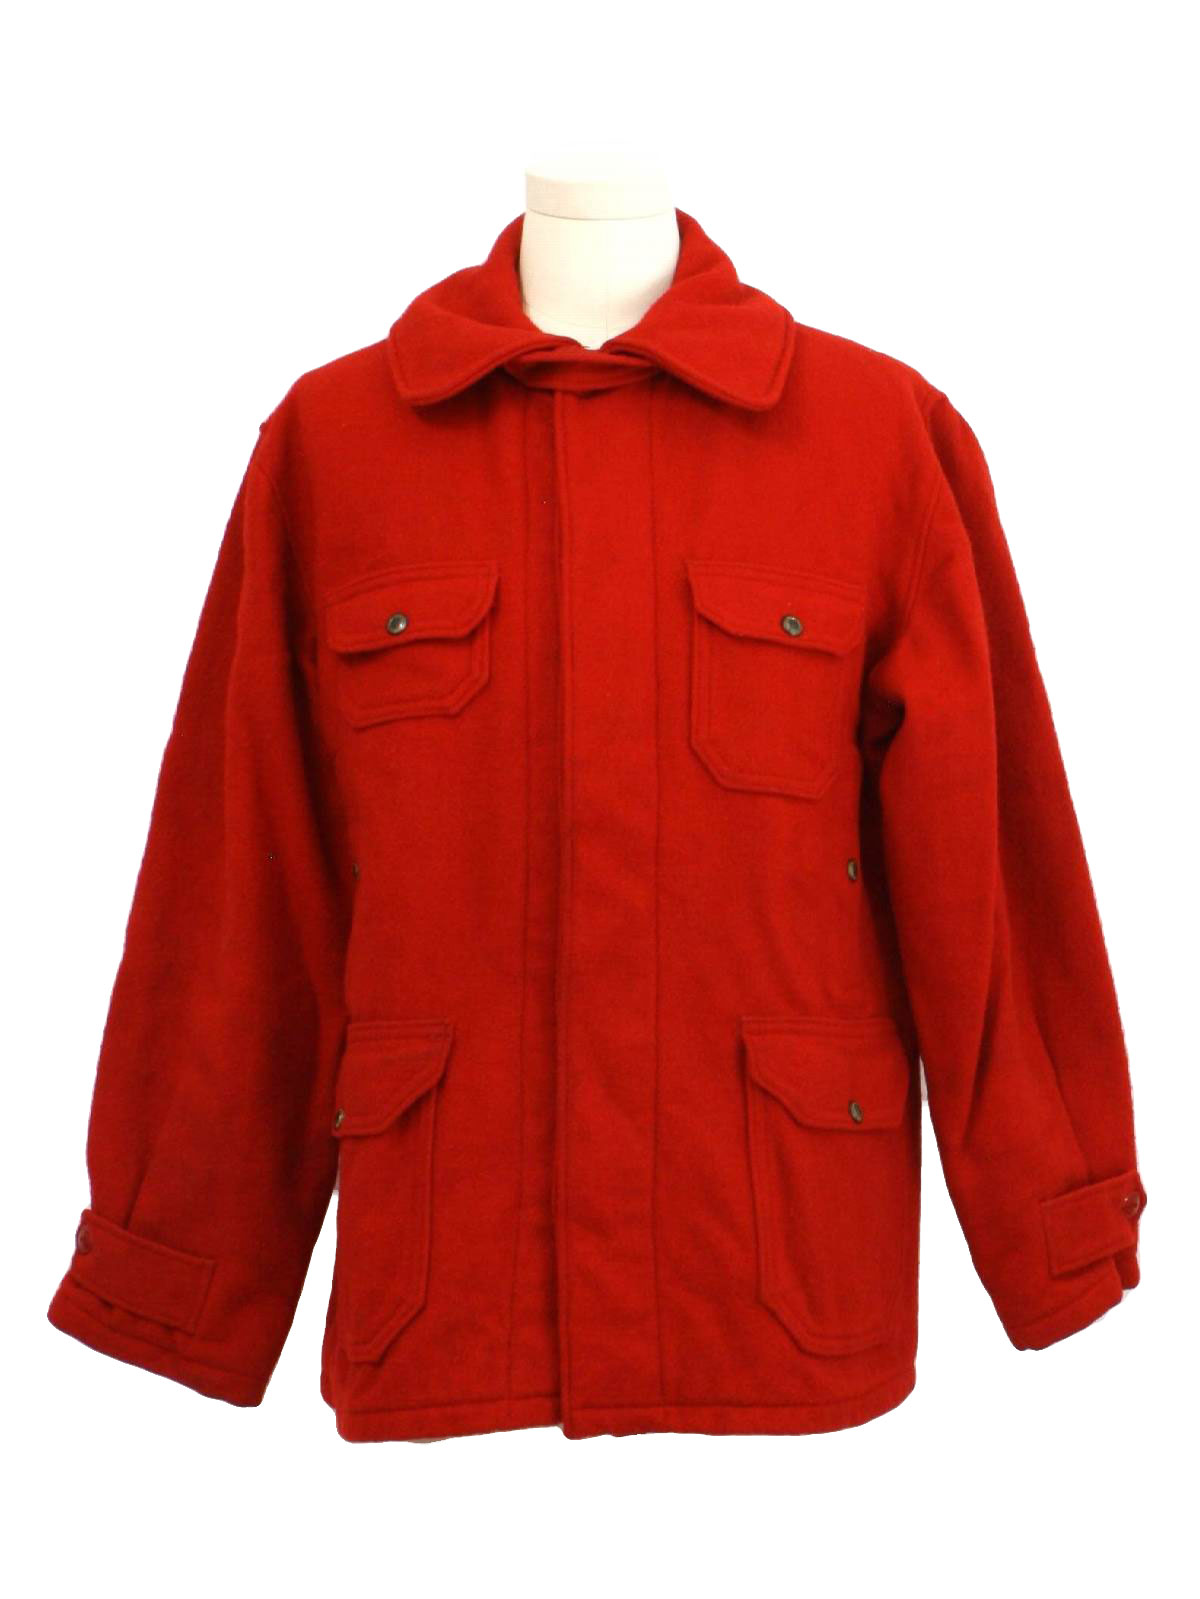 Retro 1950's Jacket (Woolrich) : 50s -Woolrich- Mens red flannel lined ...